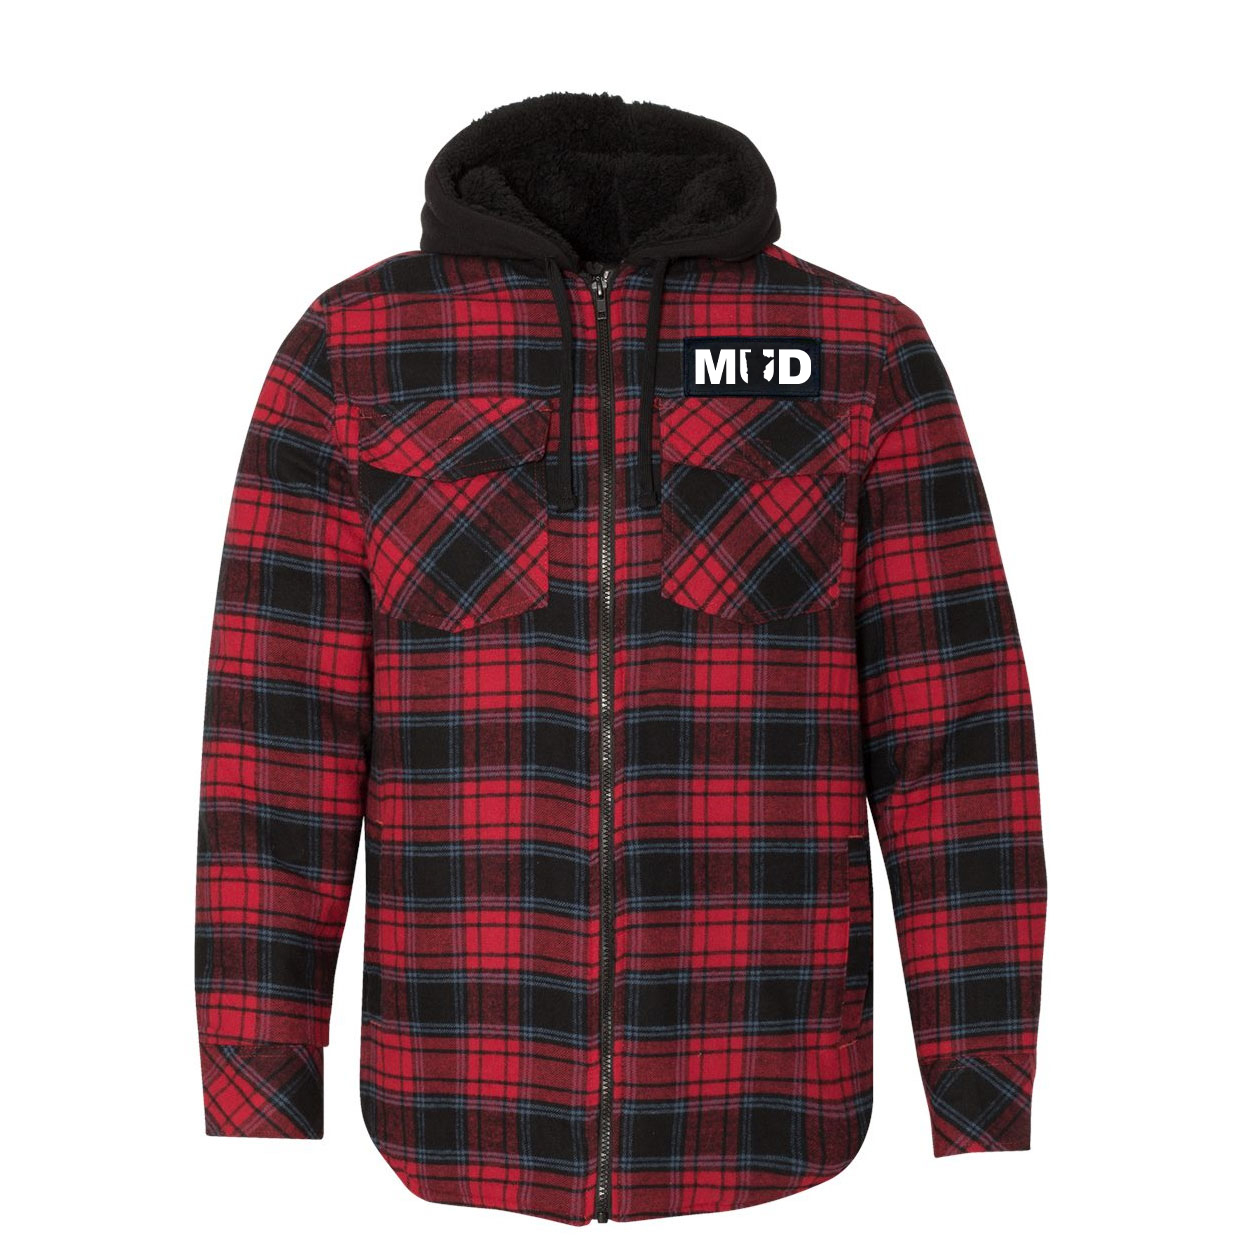 Mud Minnesota Classic Unisex Full Zip Woven Patch Hooded Flannel Jacket Red/Black Buffalo (White Logo)